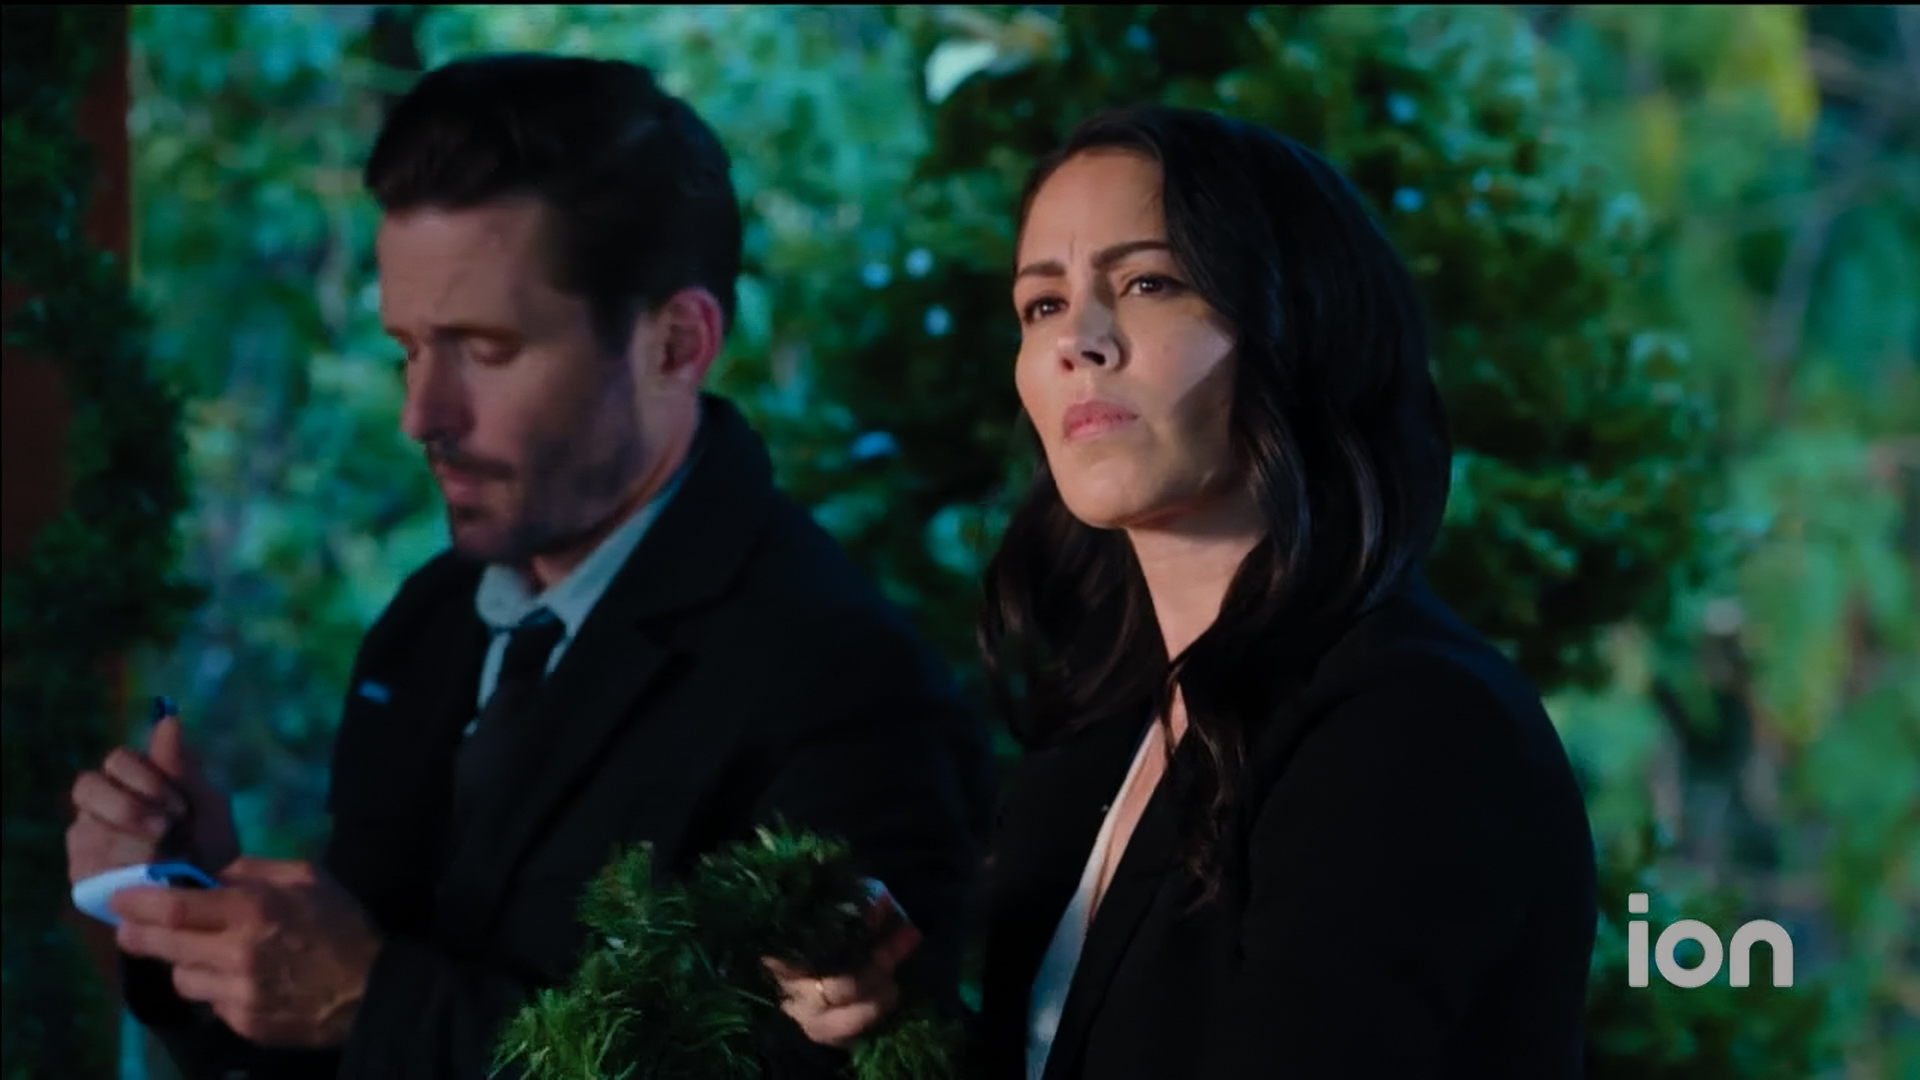 frame of actors Michelle Borth and Jarrid Masse from the ION movie 'the Christmas Thief' by cinematographer Jason Kraynek